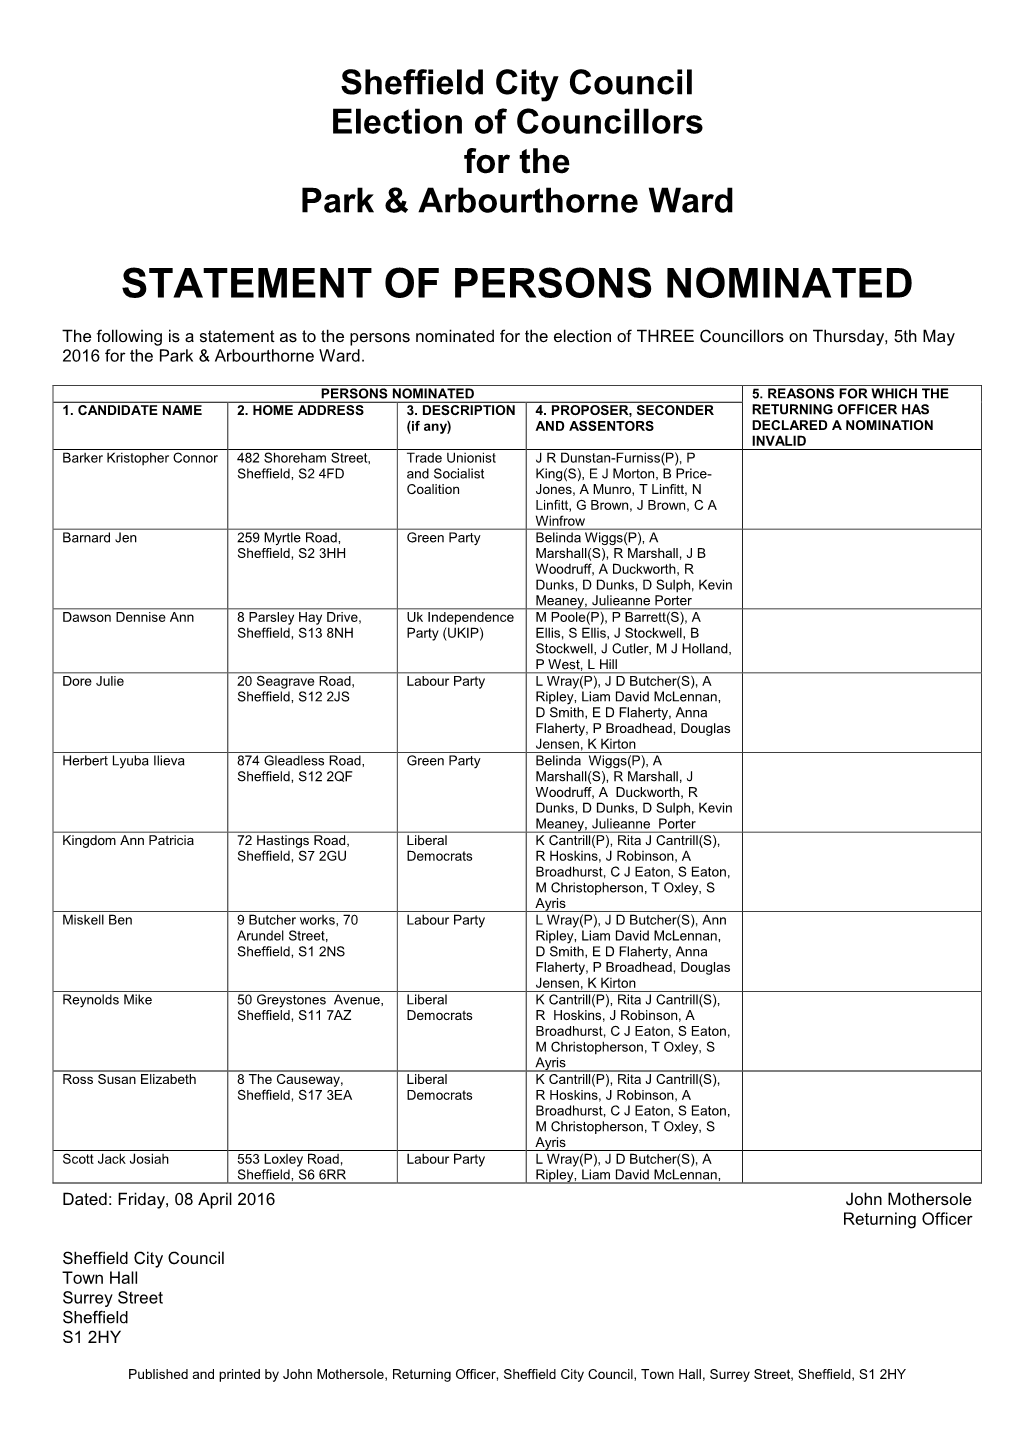 Sheffield City Council Statement of Persons Nominated May 2016